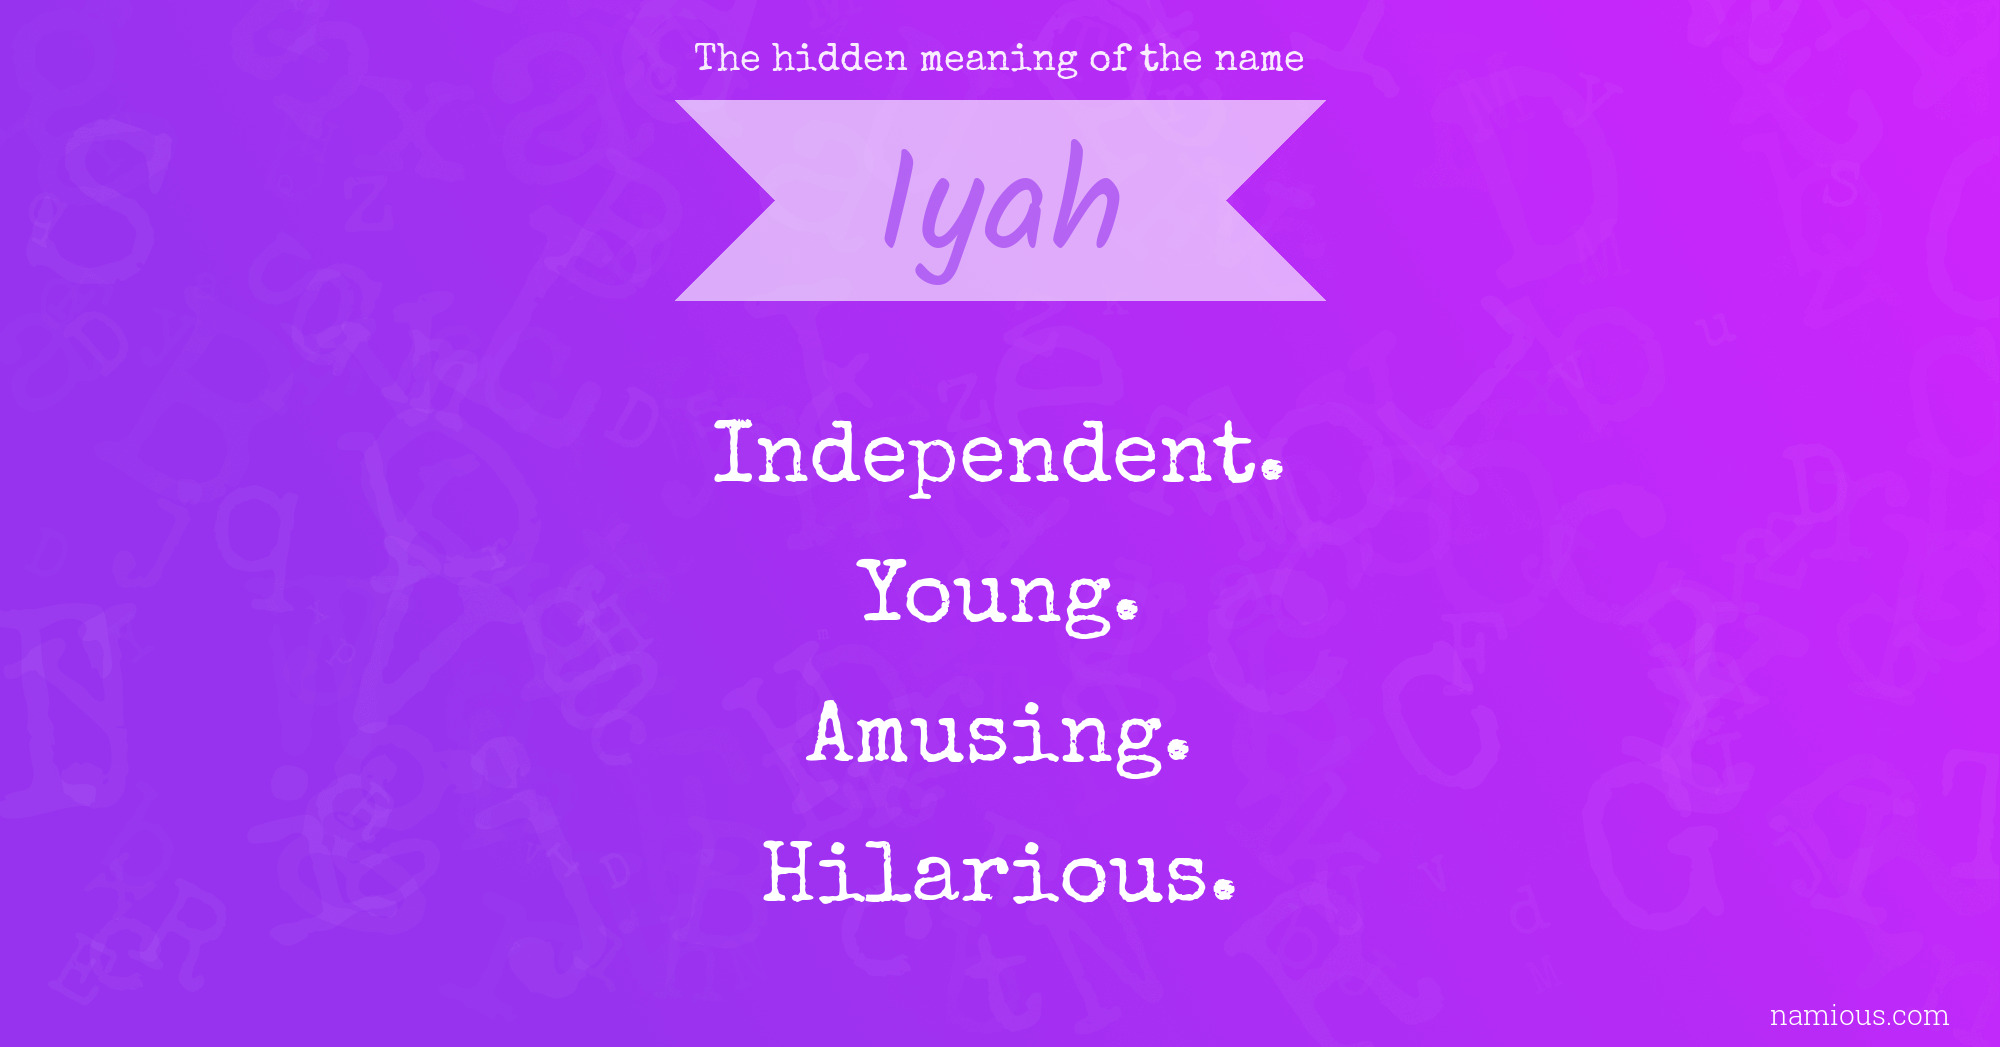 The hidden meaning of the name Iyah